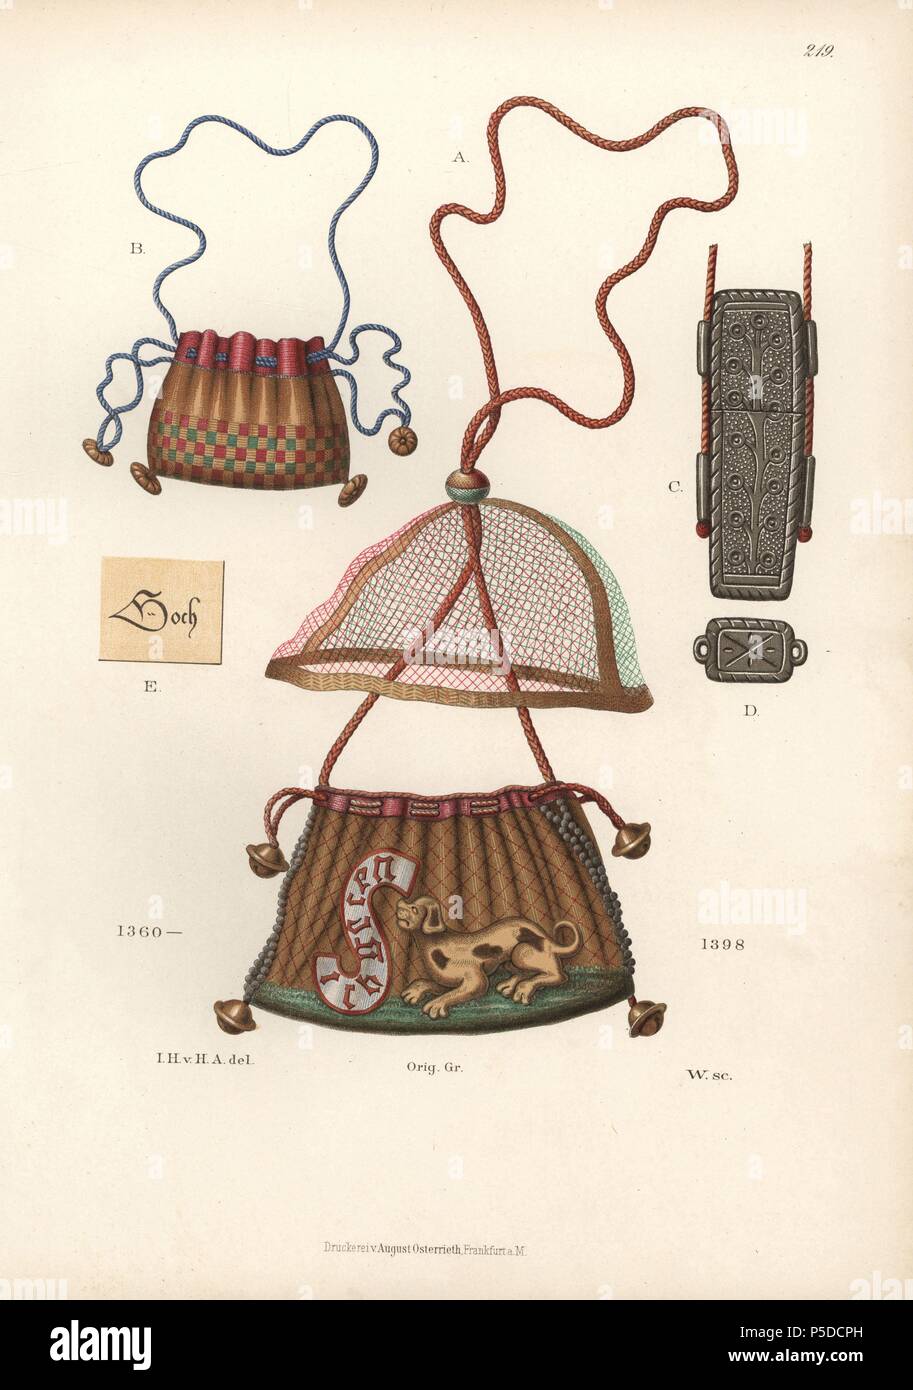 Chromolithograph from Hefner-Alteneck's 'Costumes, Artworks and Appliances from the early Middle Ages to the end of the 18th Century,' Frankfurt, 1883. IIlustration drawn by Hefner-Alteneck, lithographed by W, and published by Heinrich Keller. Dr. Jakob Heinrich von Hefner-Alteneck (1811-1903) was a German archeologist, art historian and illustrator. He was director of the Bavarian National Museum from 1868 until 1886. Stock Photo